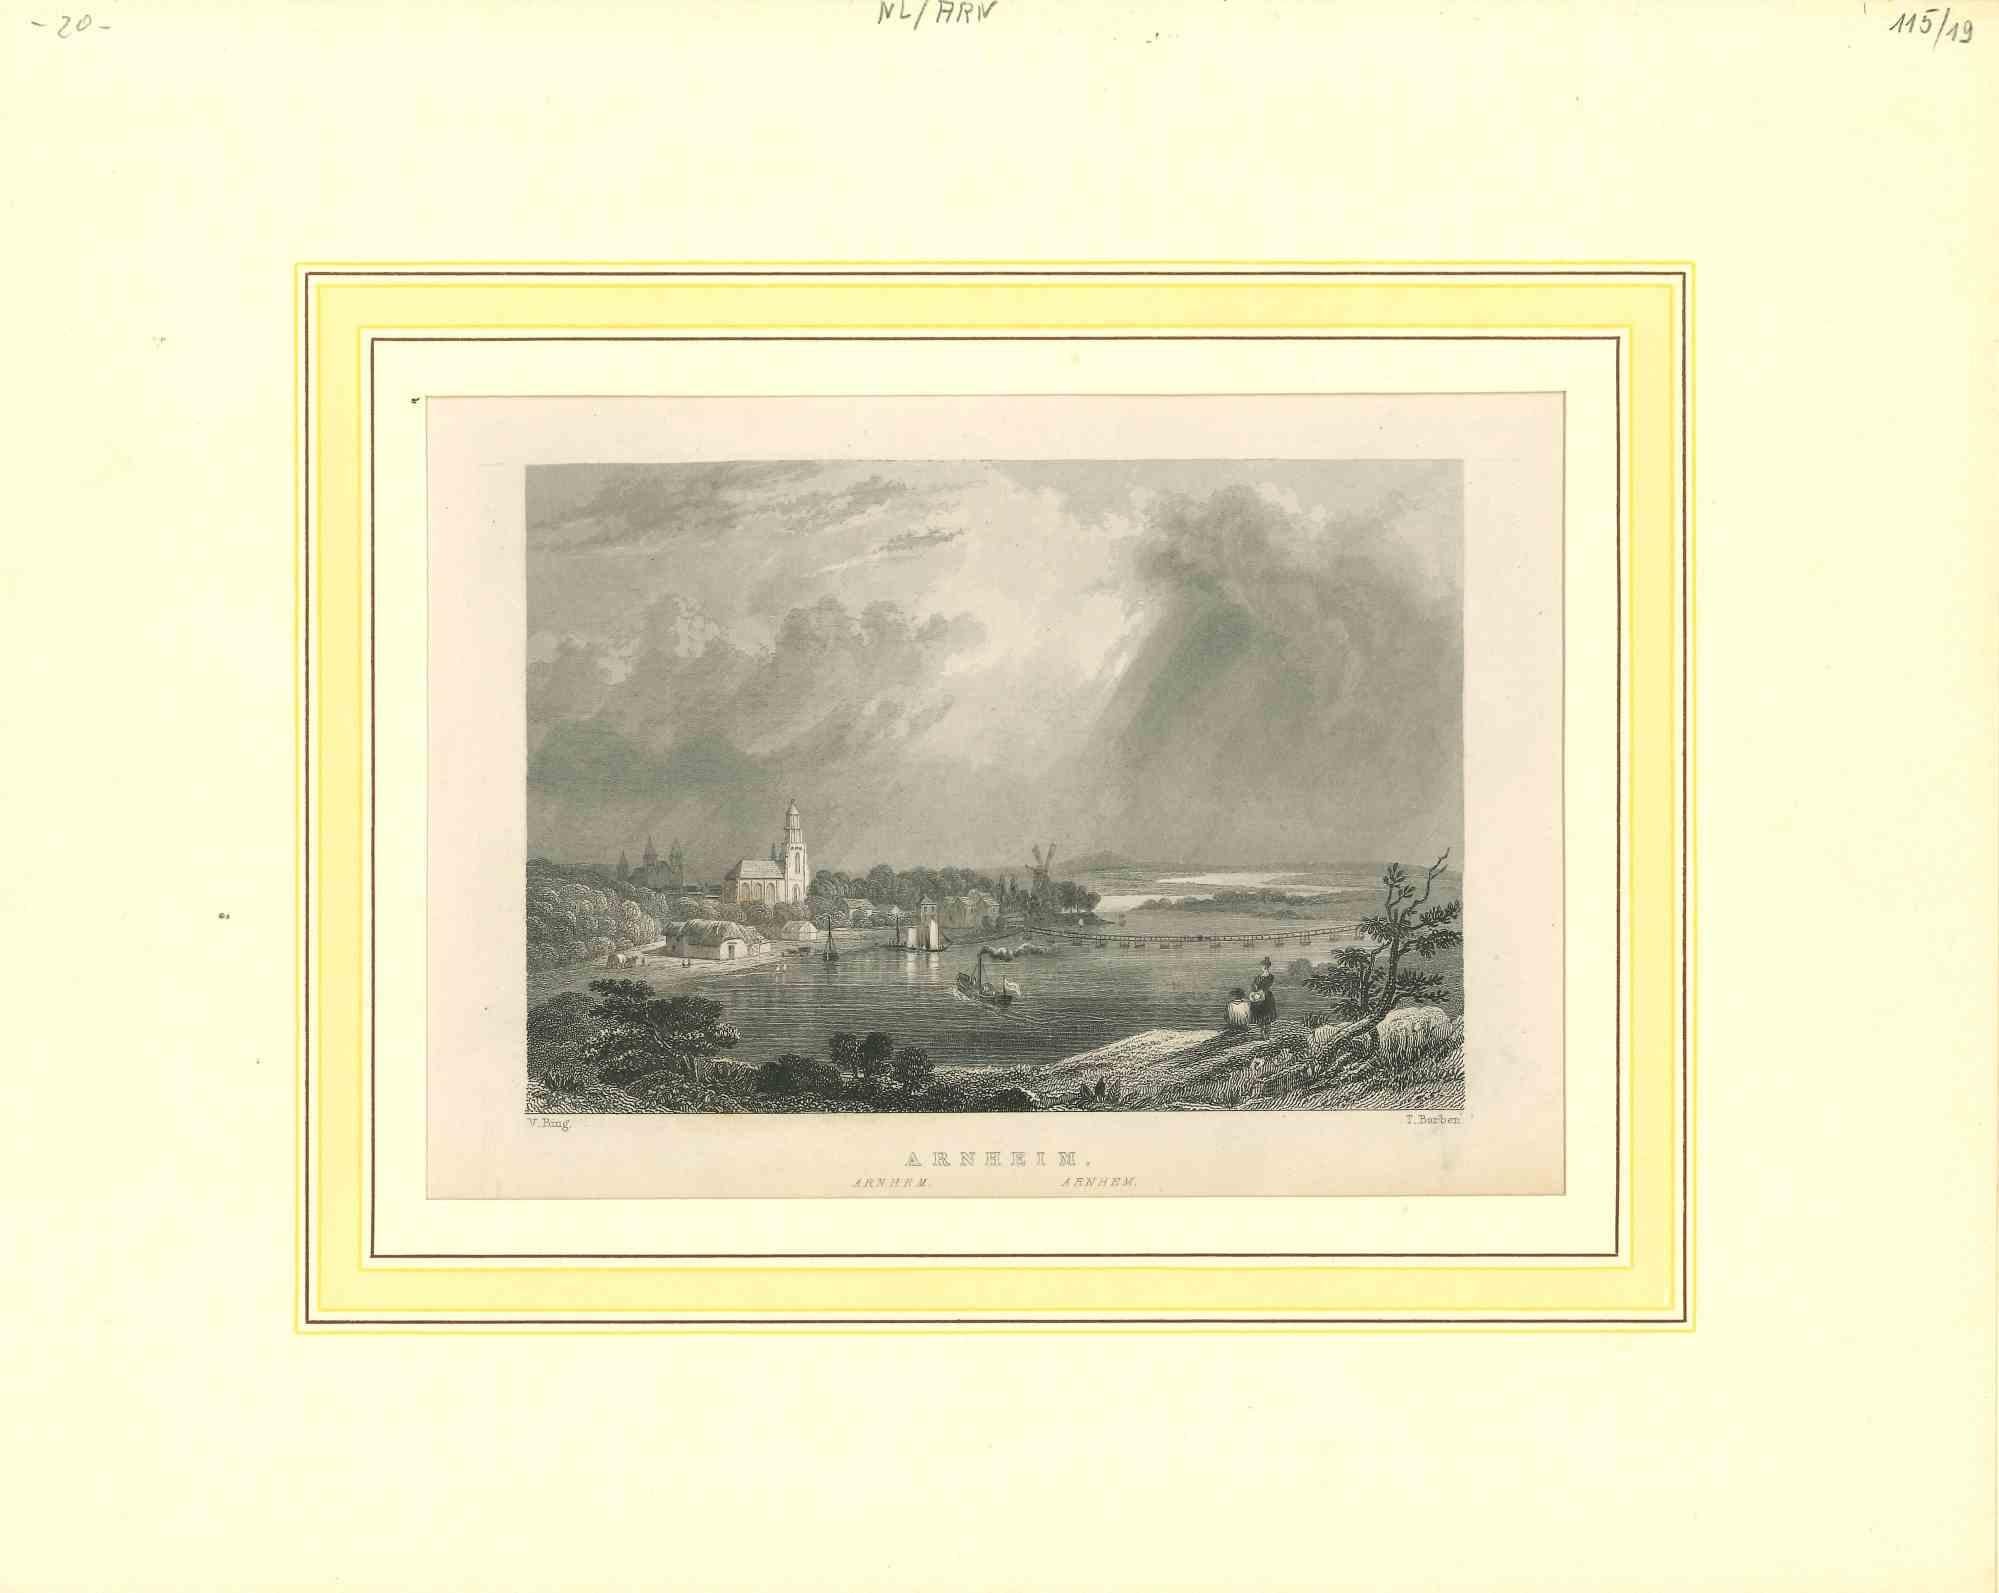 Unknown Landscape Print - Ancient View of Arnheim - Original Lithograph on Paper - Early 19th Century